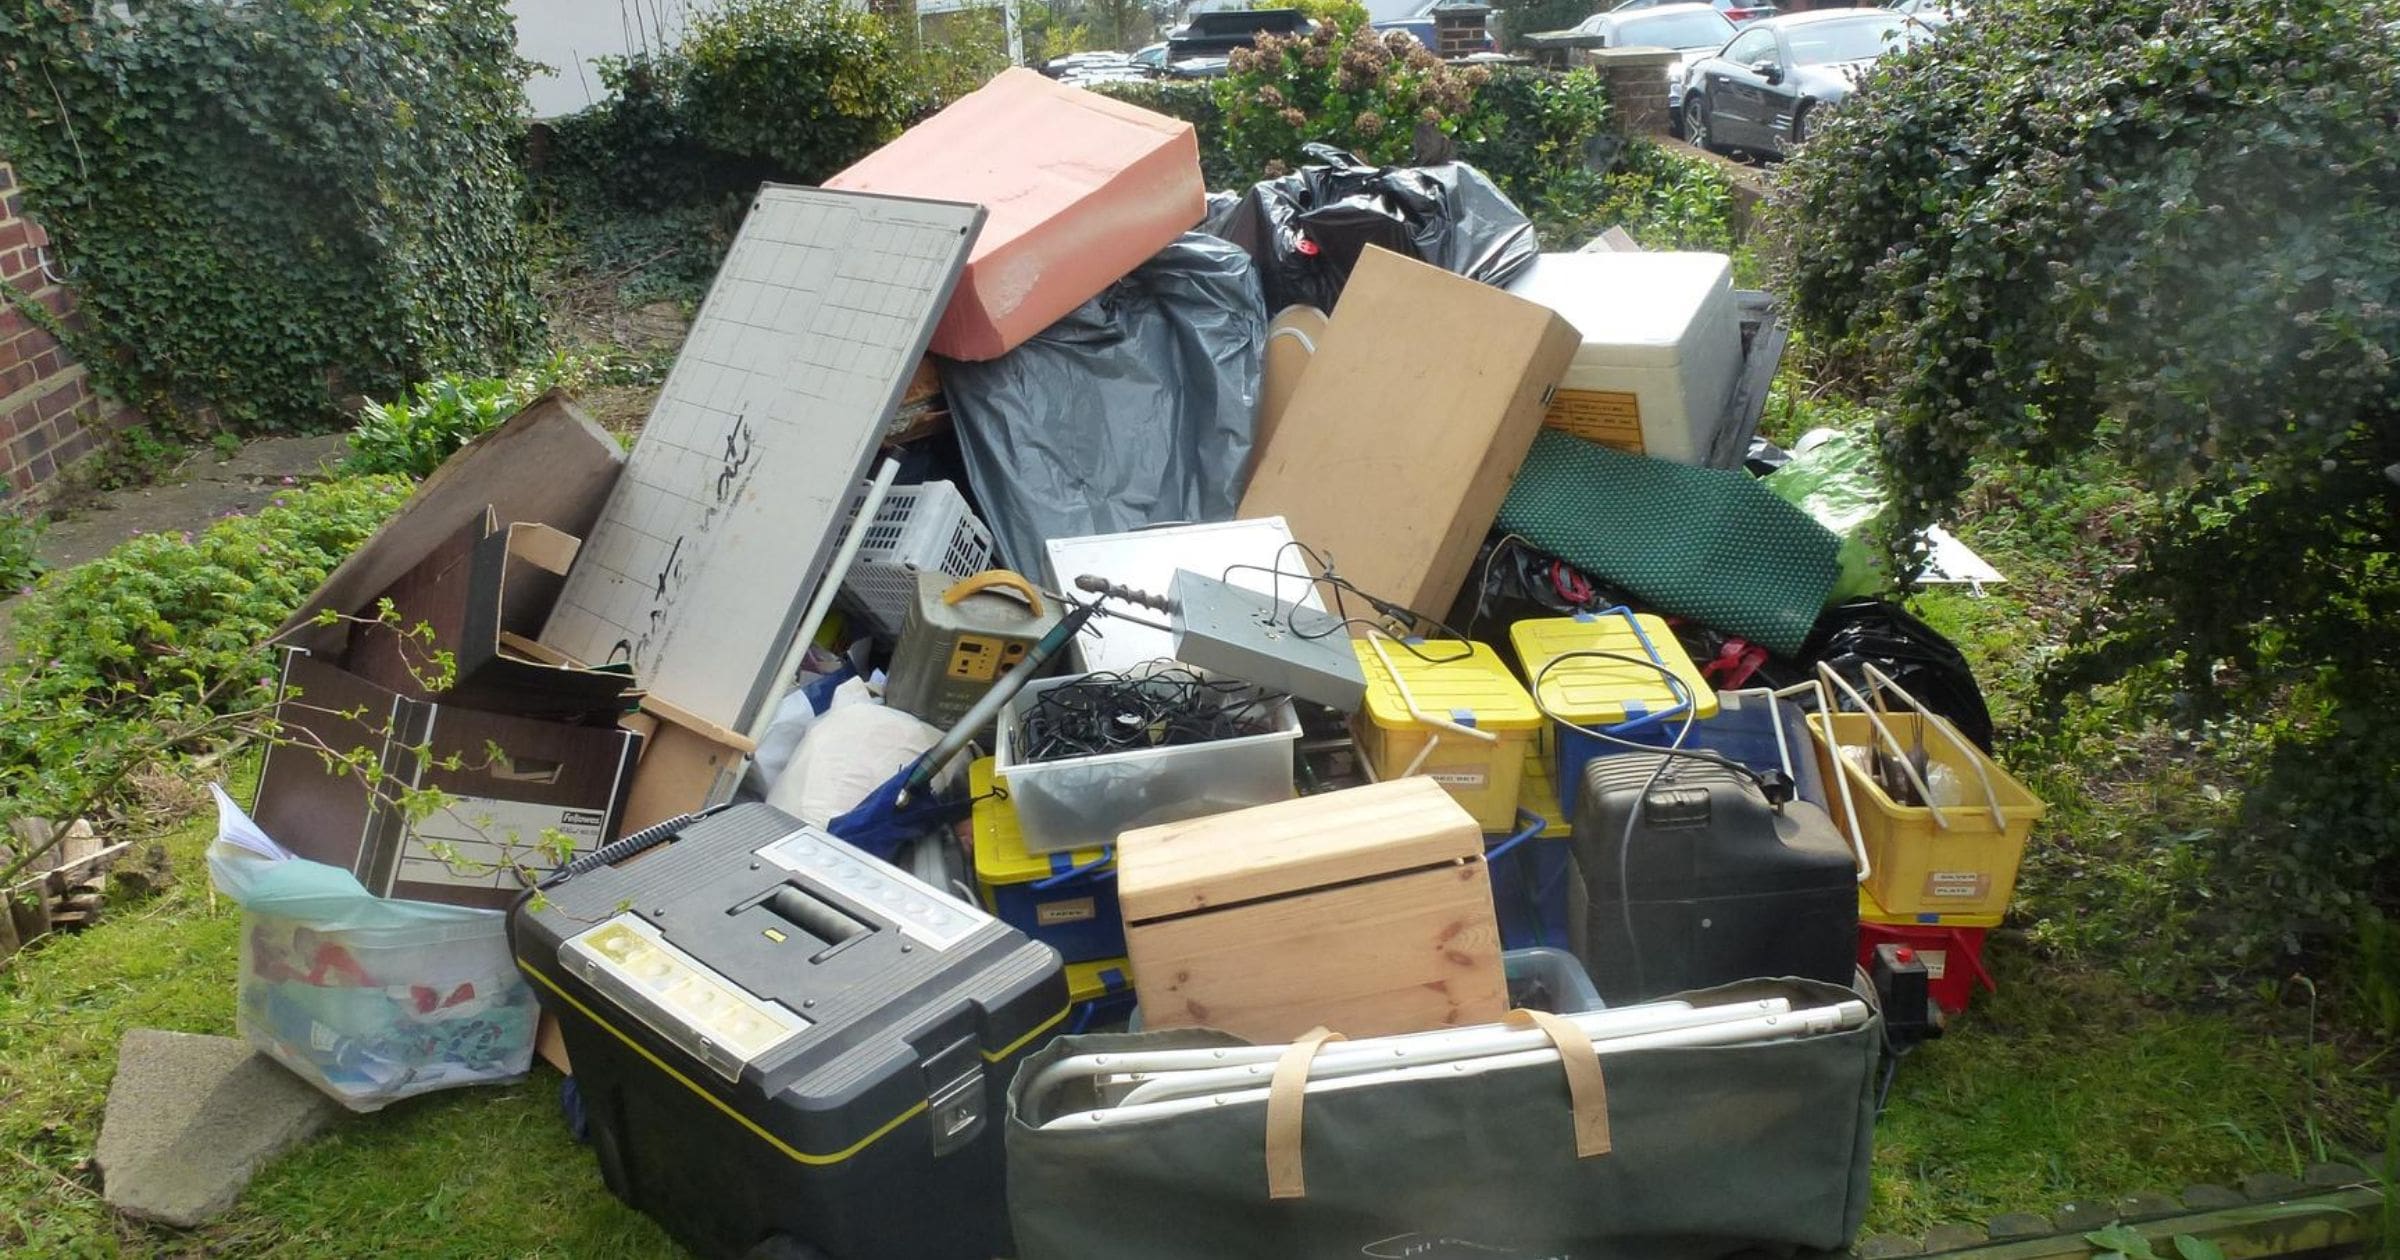 5 situations to call cheap rubbish removal service